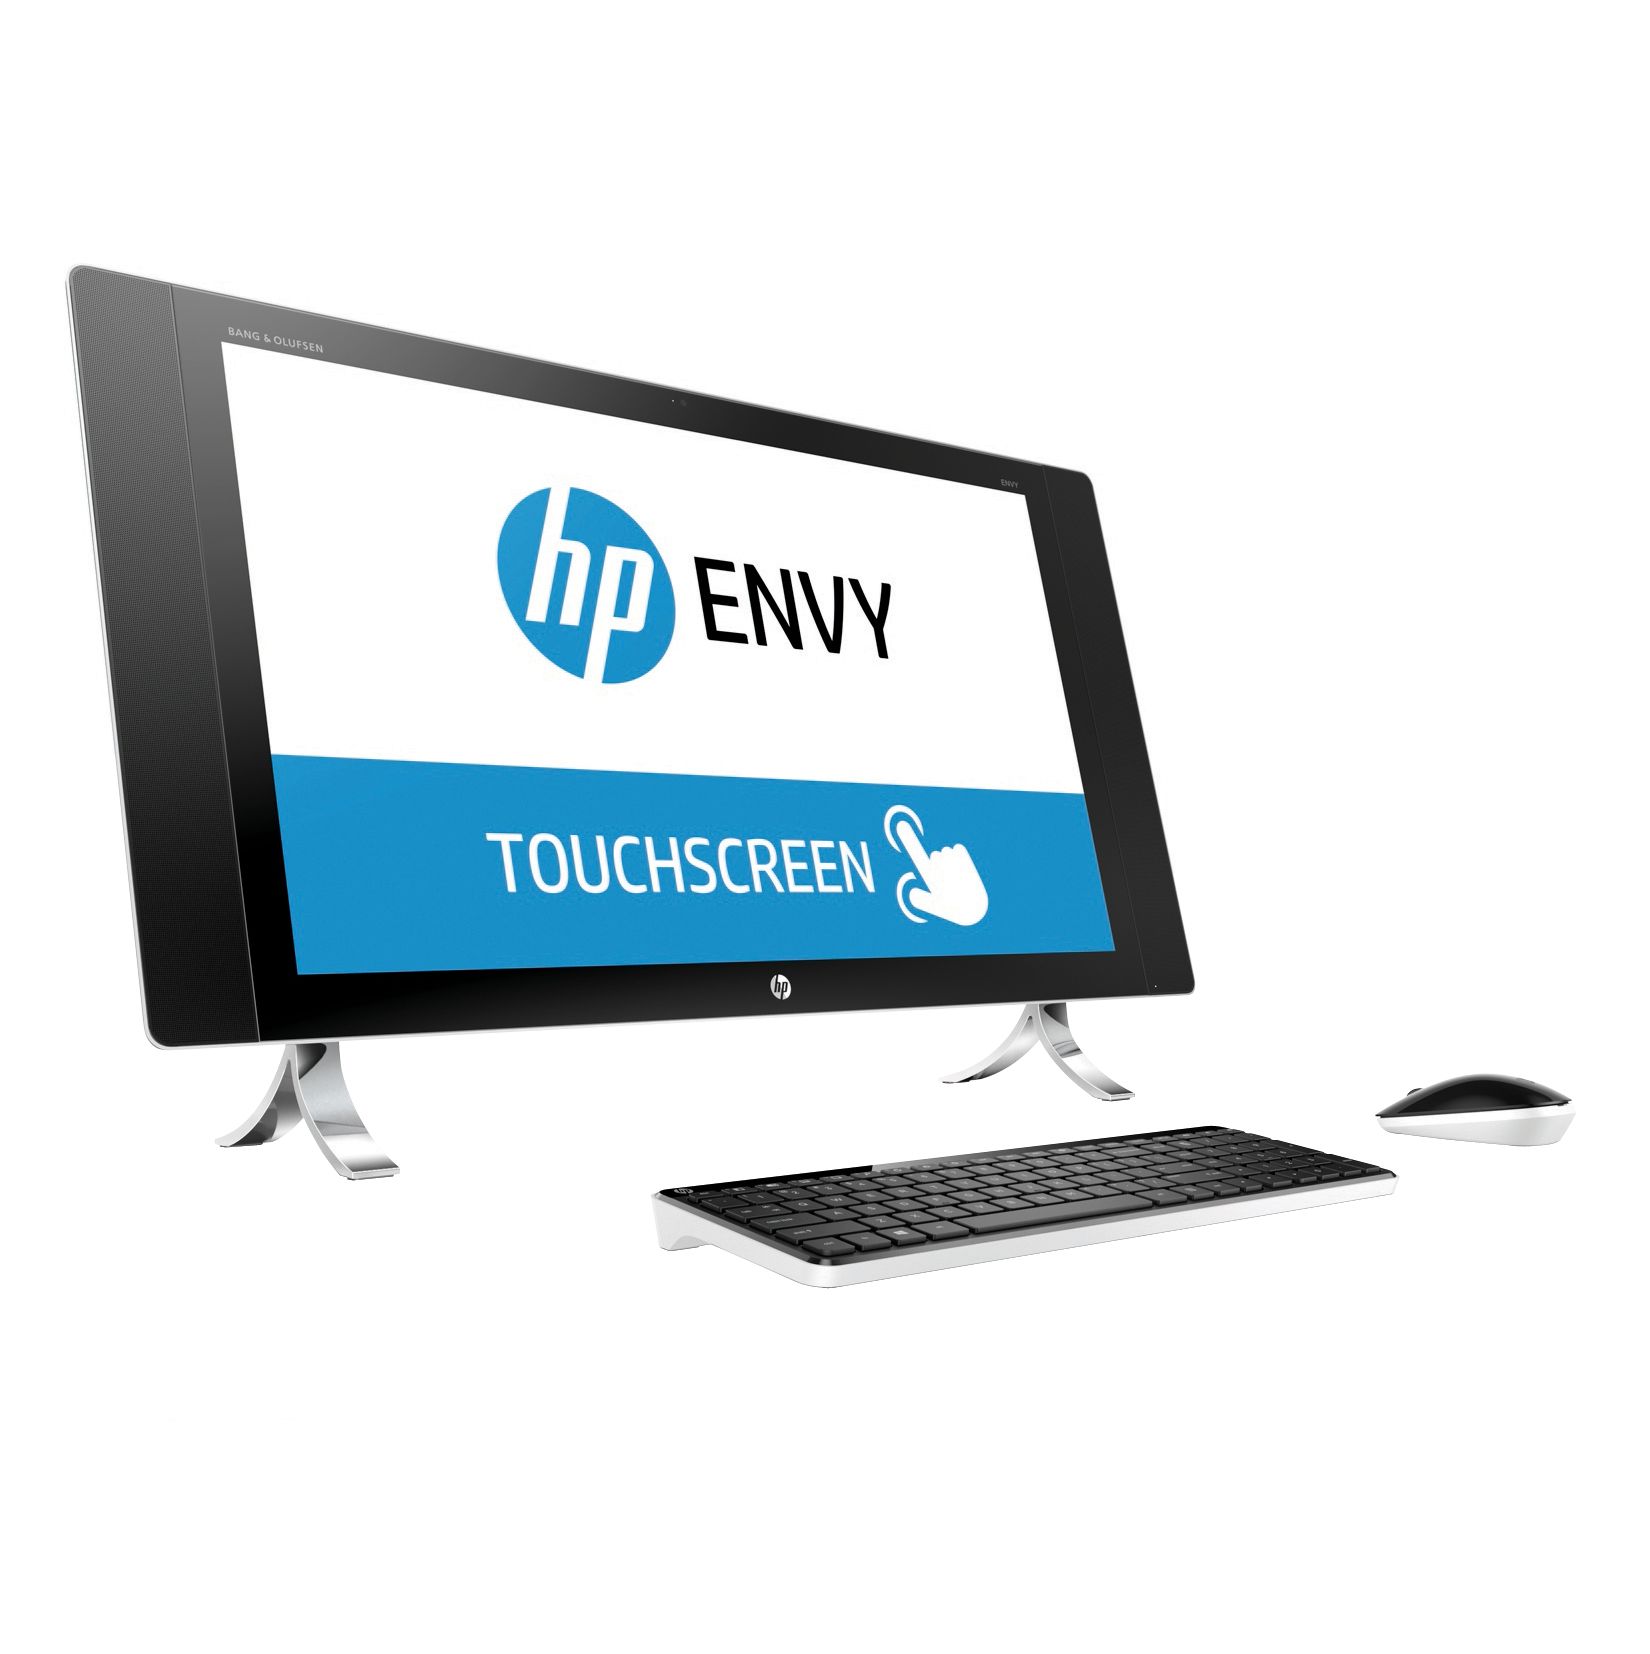 Gedetailleerd Medicinaal Cursus HP ENVY All-in-One 27-p000na Desktop PC, Intel Core i7, 8GB RAM, 1TB +  128GB, AMD Radeon R9, 27" Touch Screen, 4K Ultra HD, Pearl White